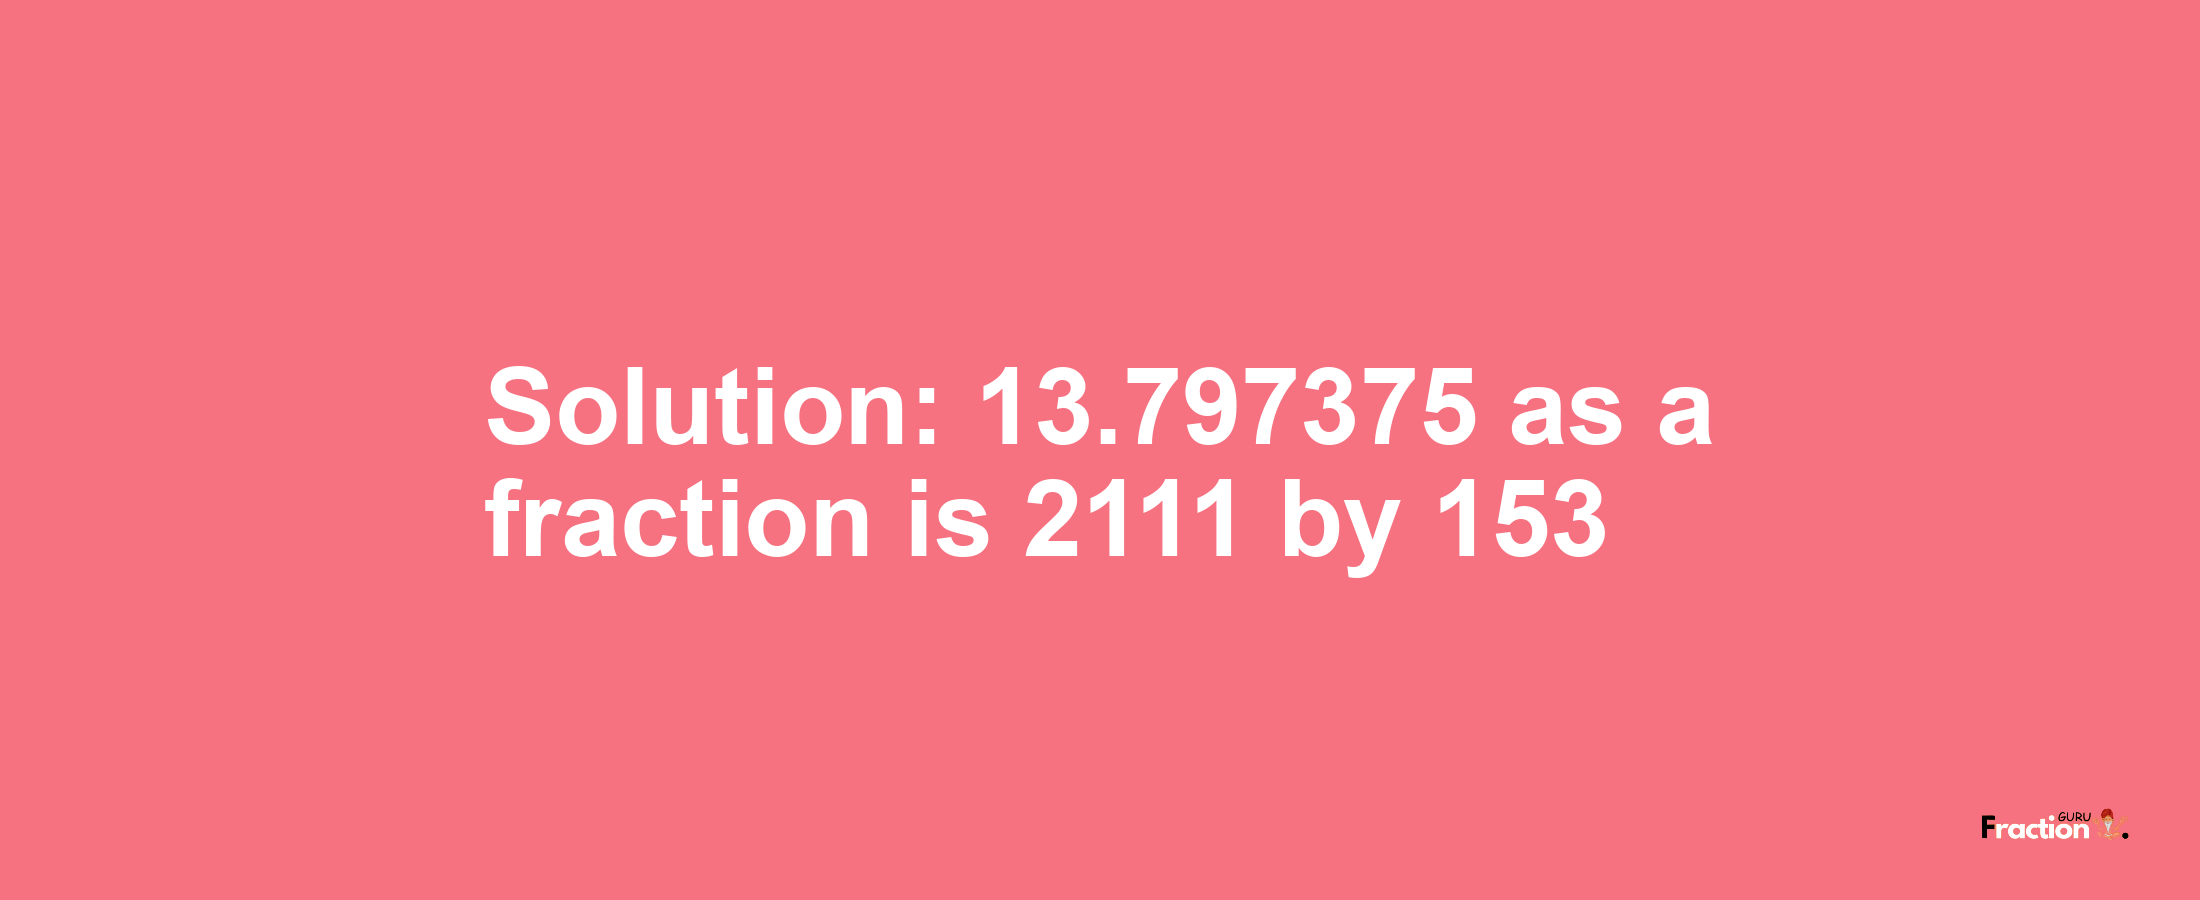 Solution:13.797375 as a fraction is 2111/153